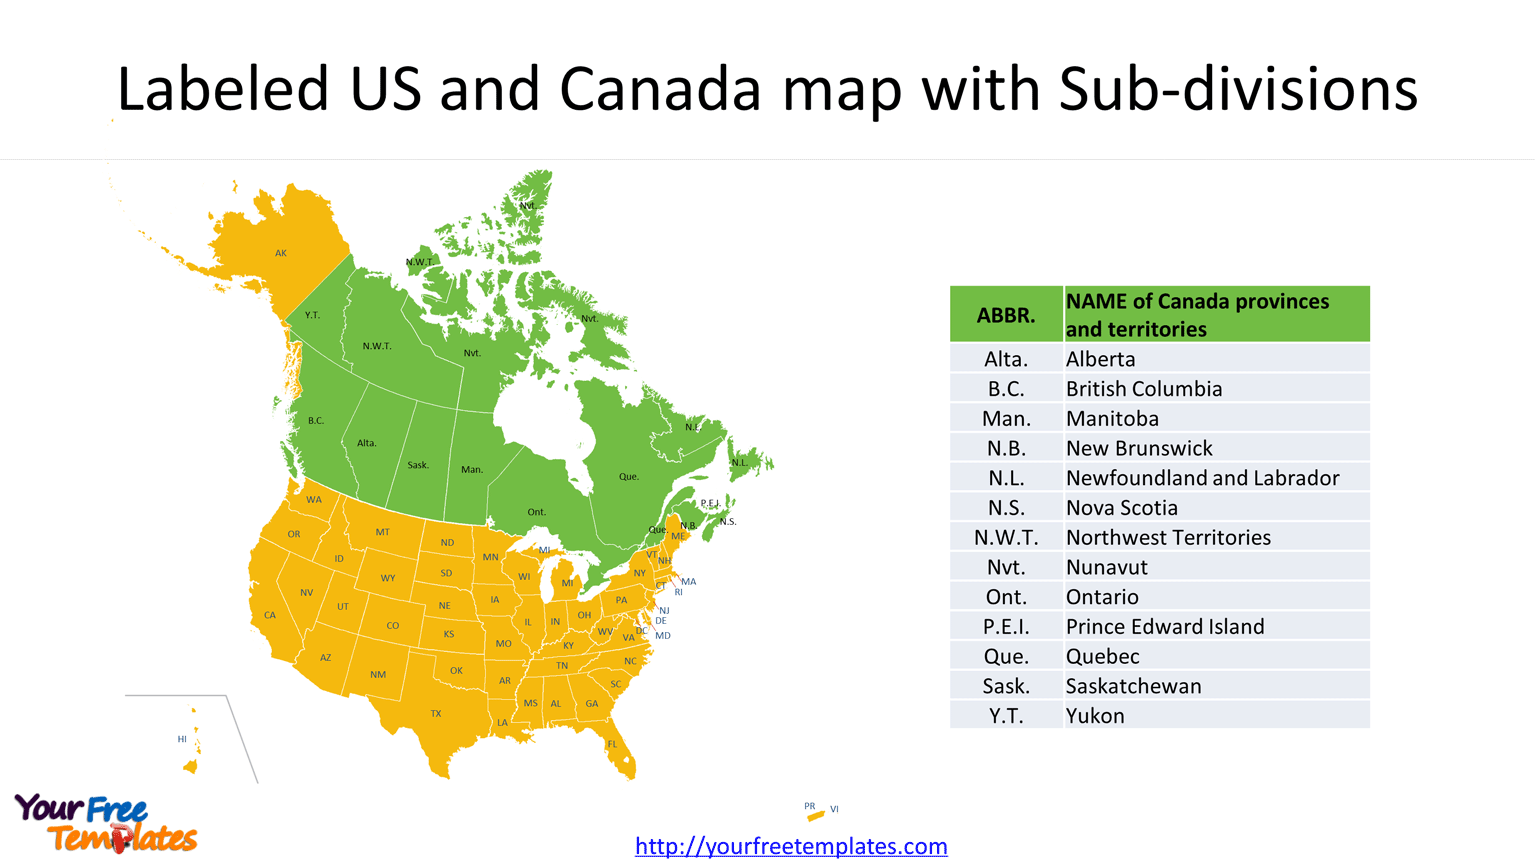 US and Canada Map of Outline